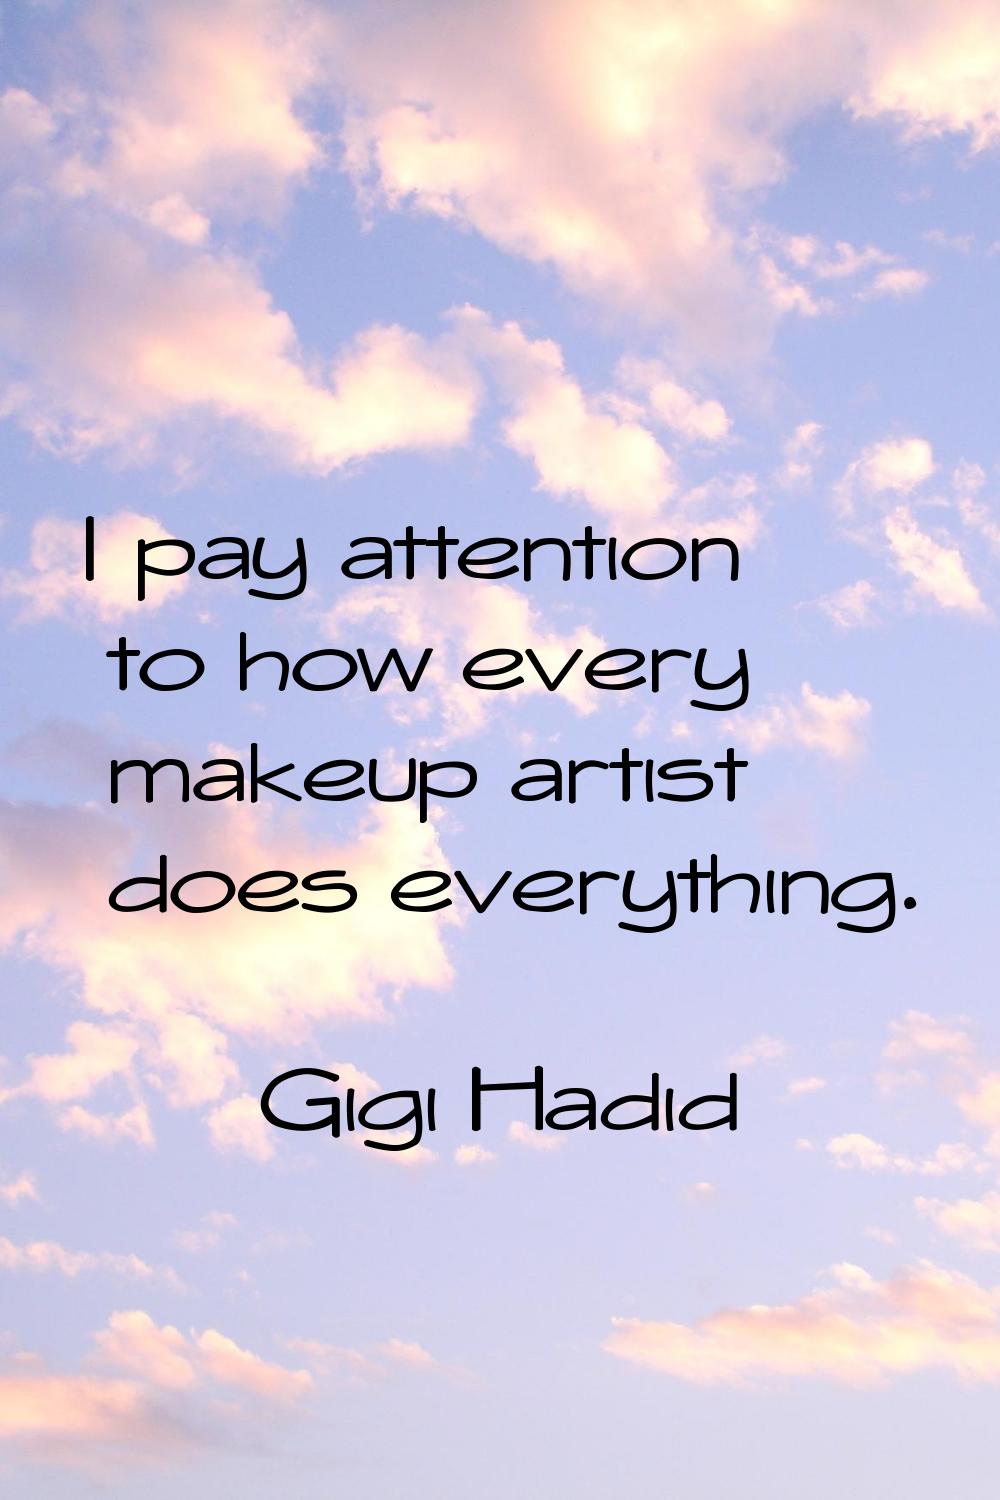 I pay attention to how every makeup artist does everything.